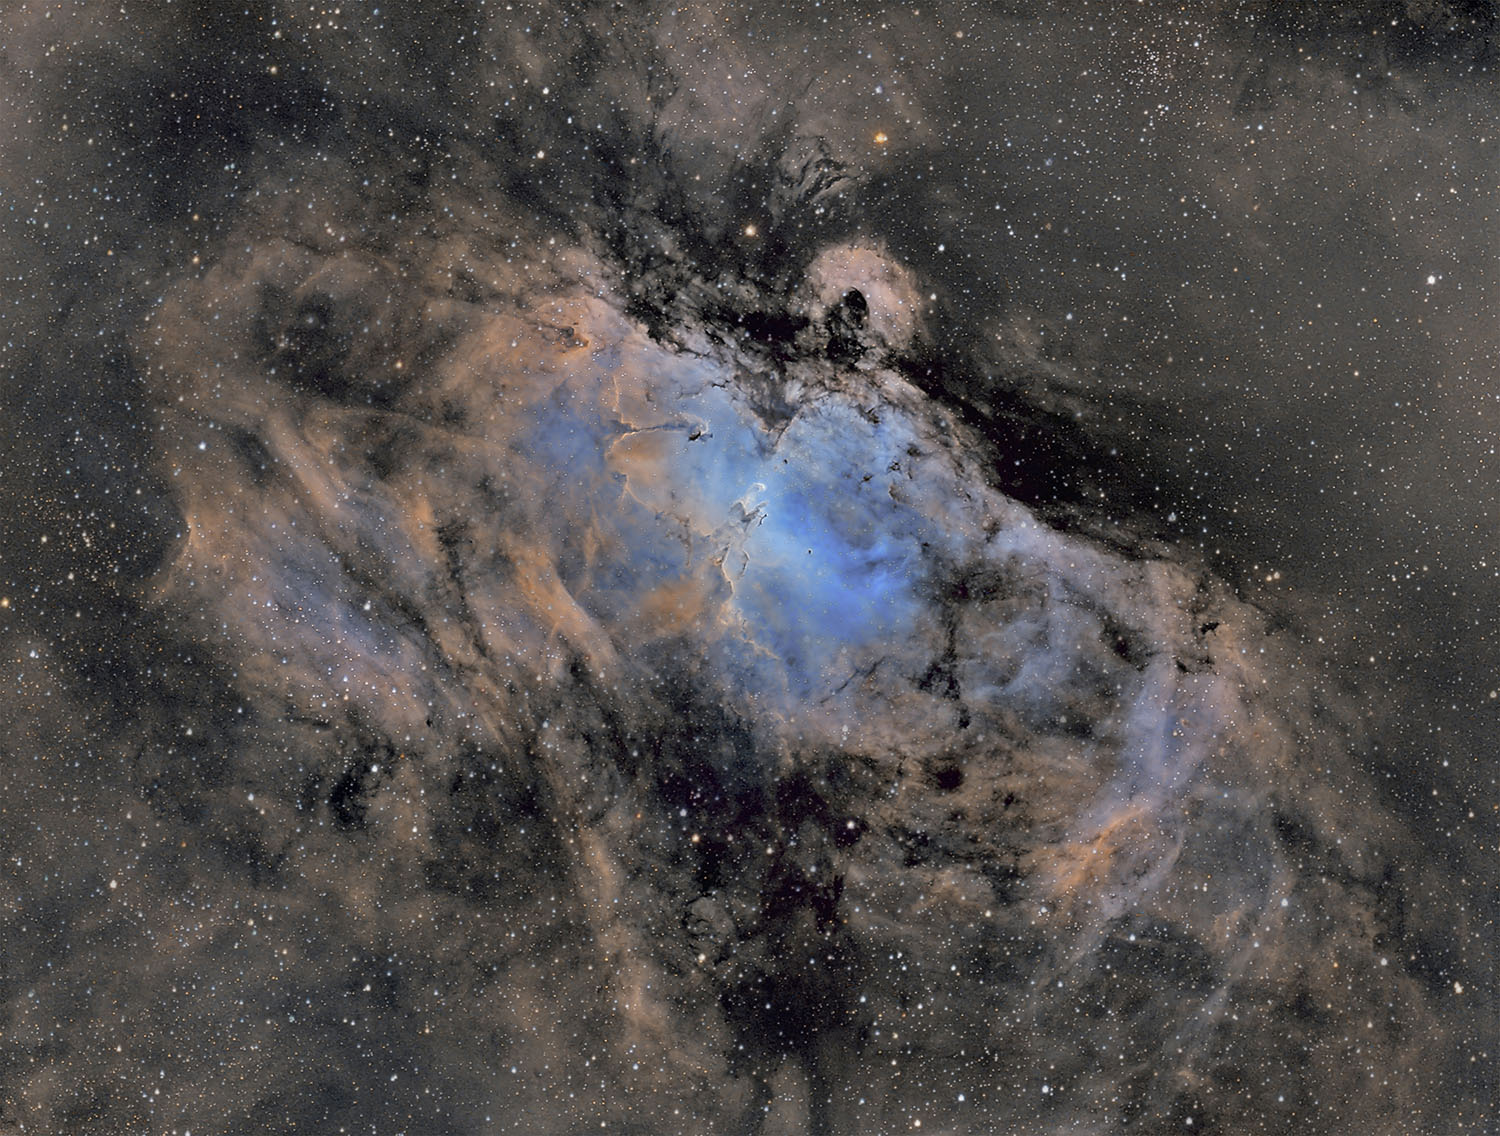 Messier 16 - NGC6611 - The Eagle Nebula
                            - Pillars of Creation - Star Queen - Serpens
                            - FINAL for BurlCam